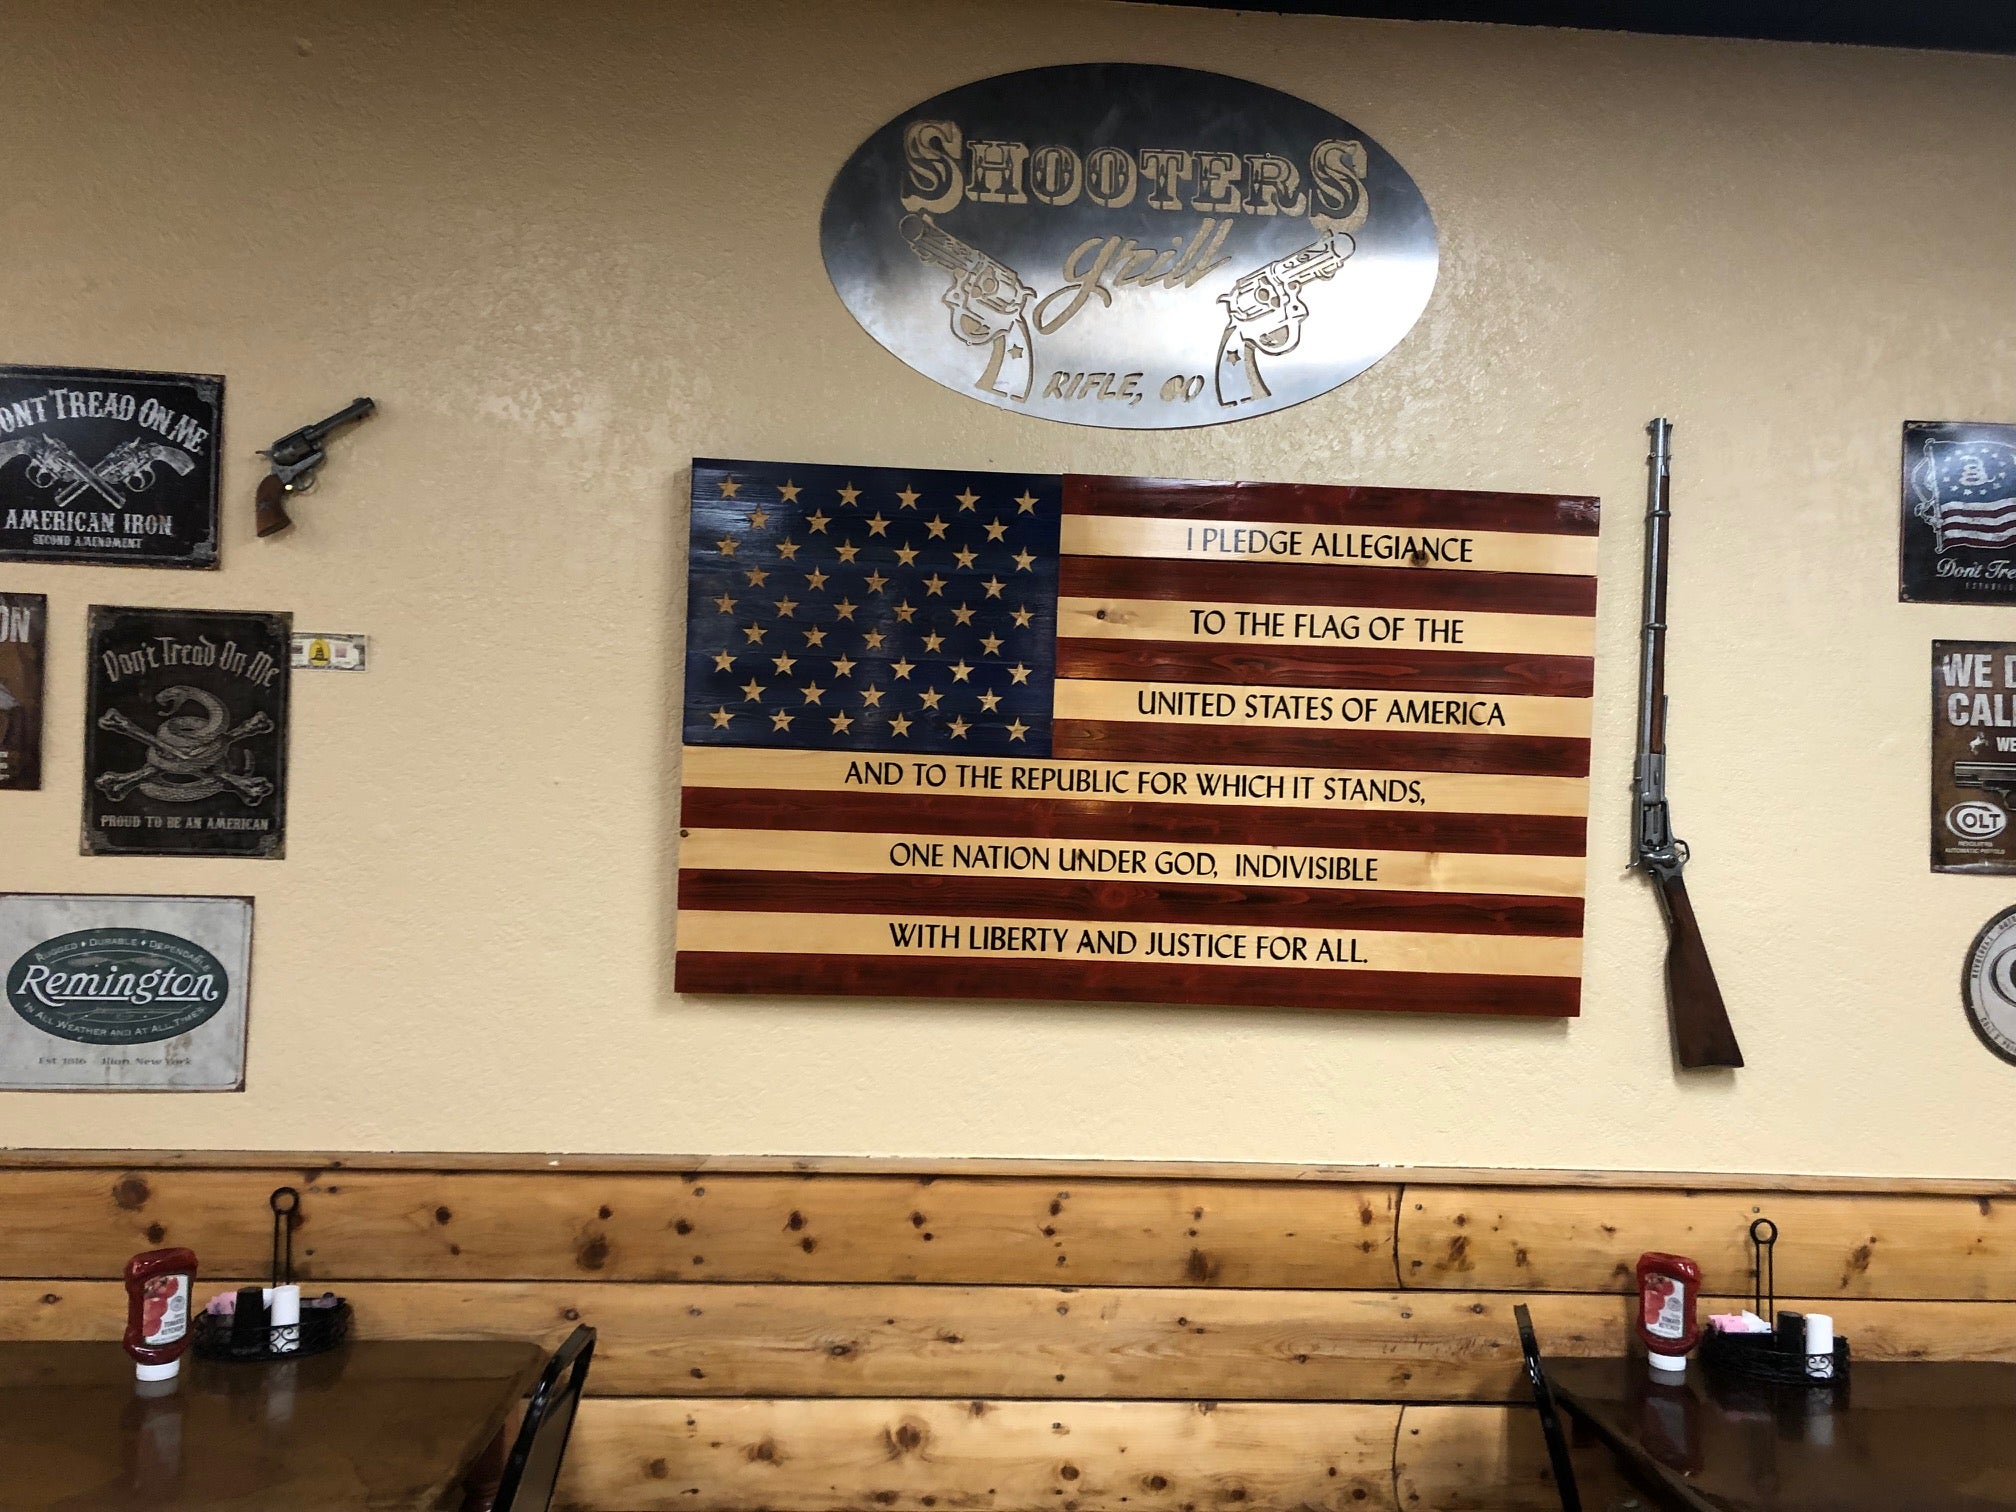 Boebert and her then-husband operated Shooters Grill in Rifle until 2022; it became a tourist attraction for gun paraphernalia and later its association with the firebrand congresswoman